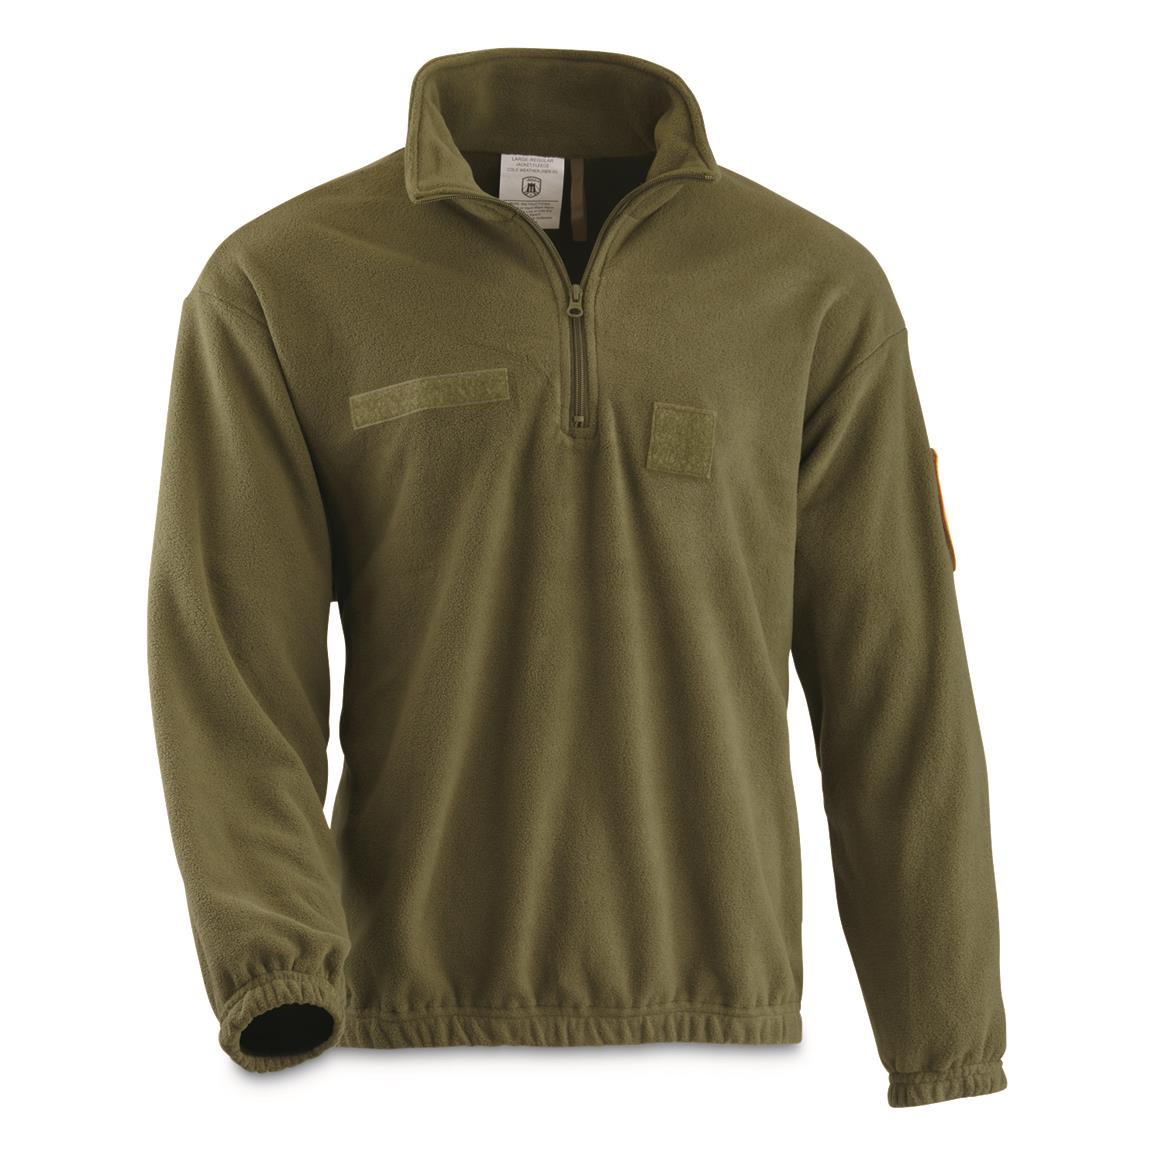 Brooklyn Armed Forces Quarter Zip Heavyweight Fleece Pullover, Olive Drab